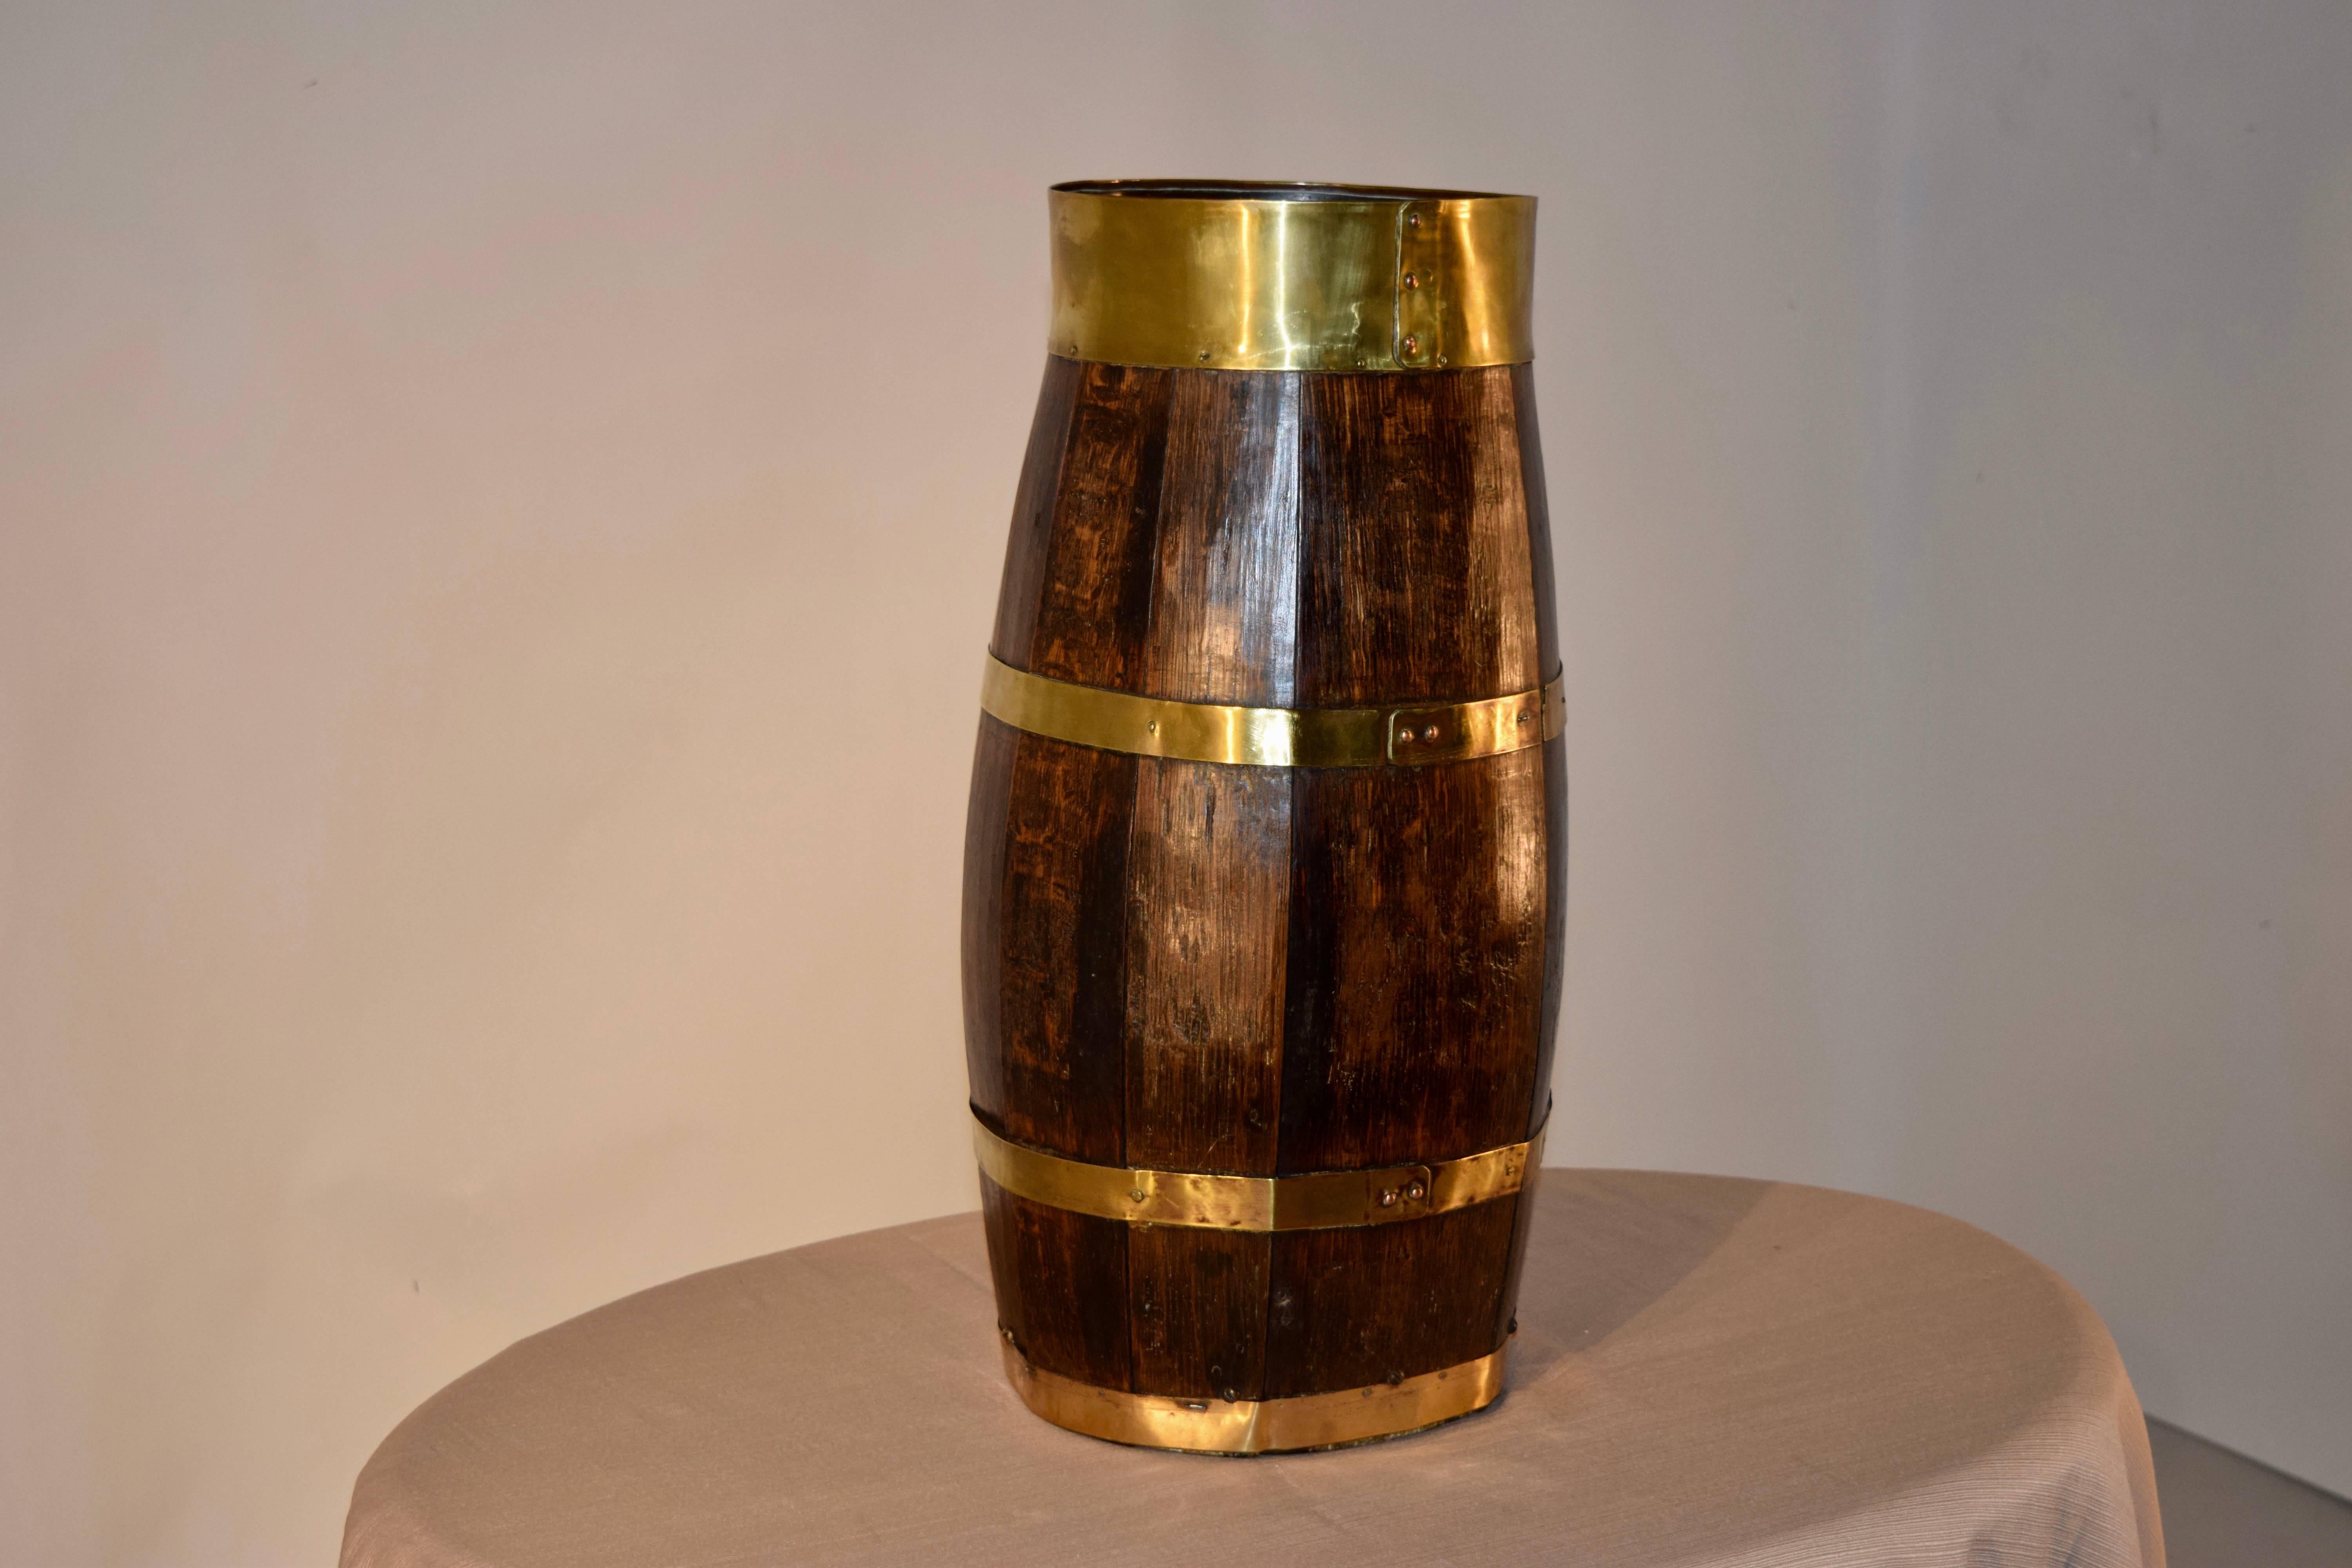 19th century English oak cane stand banded in handmade brass bands.